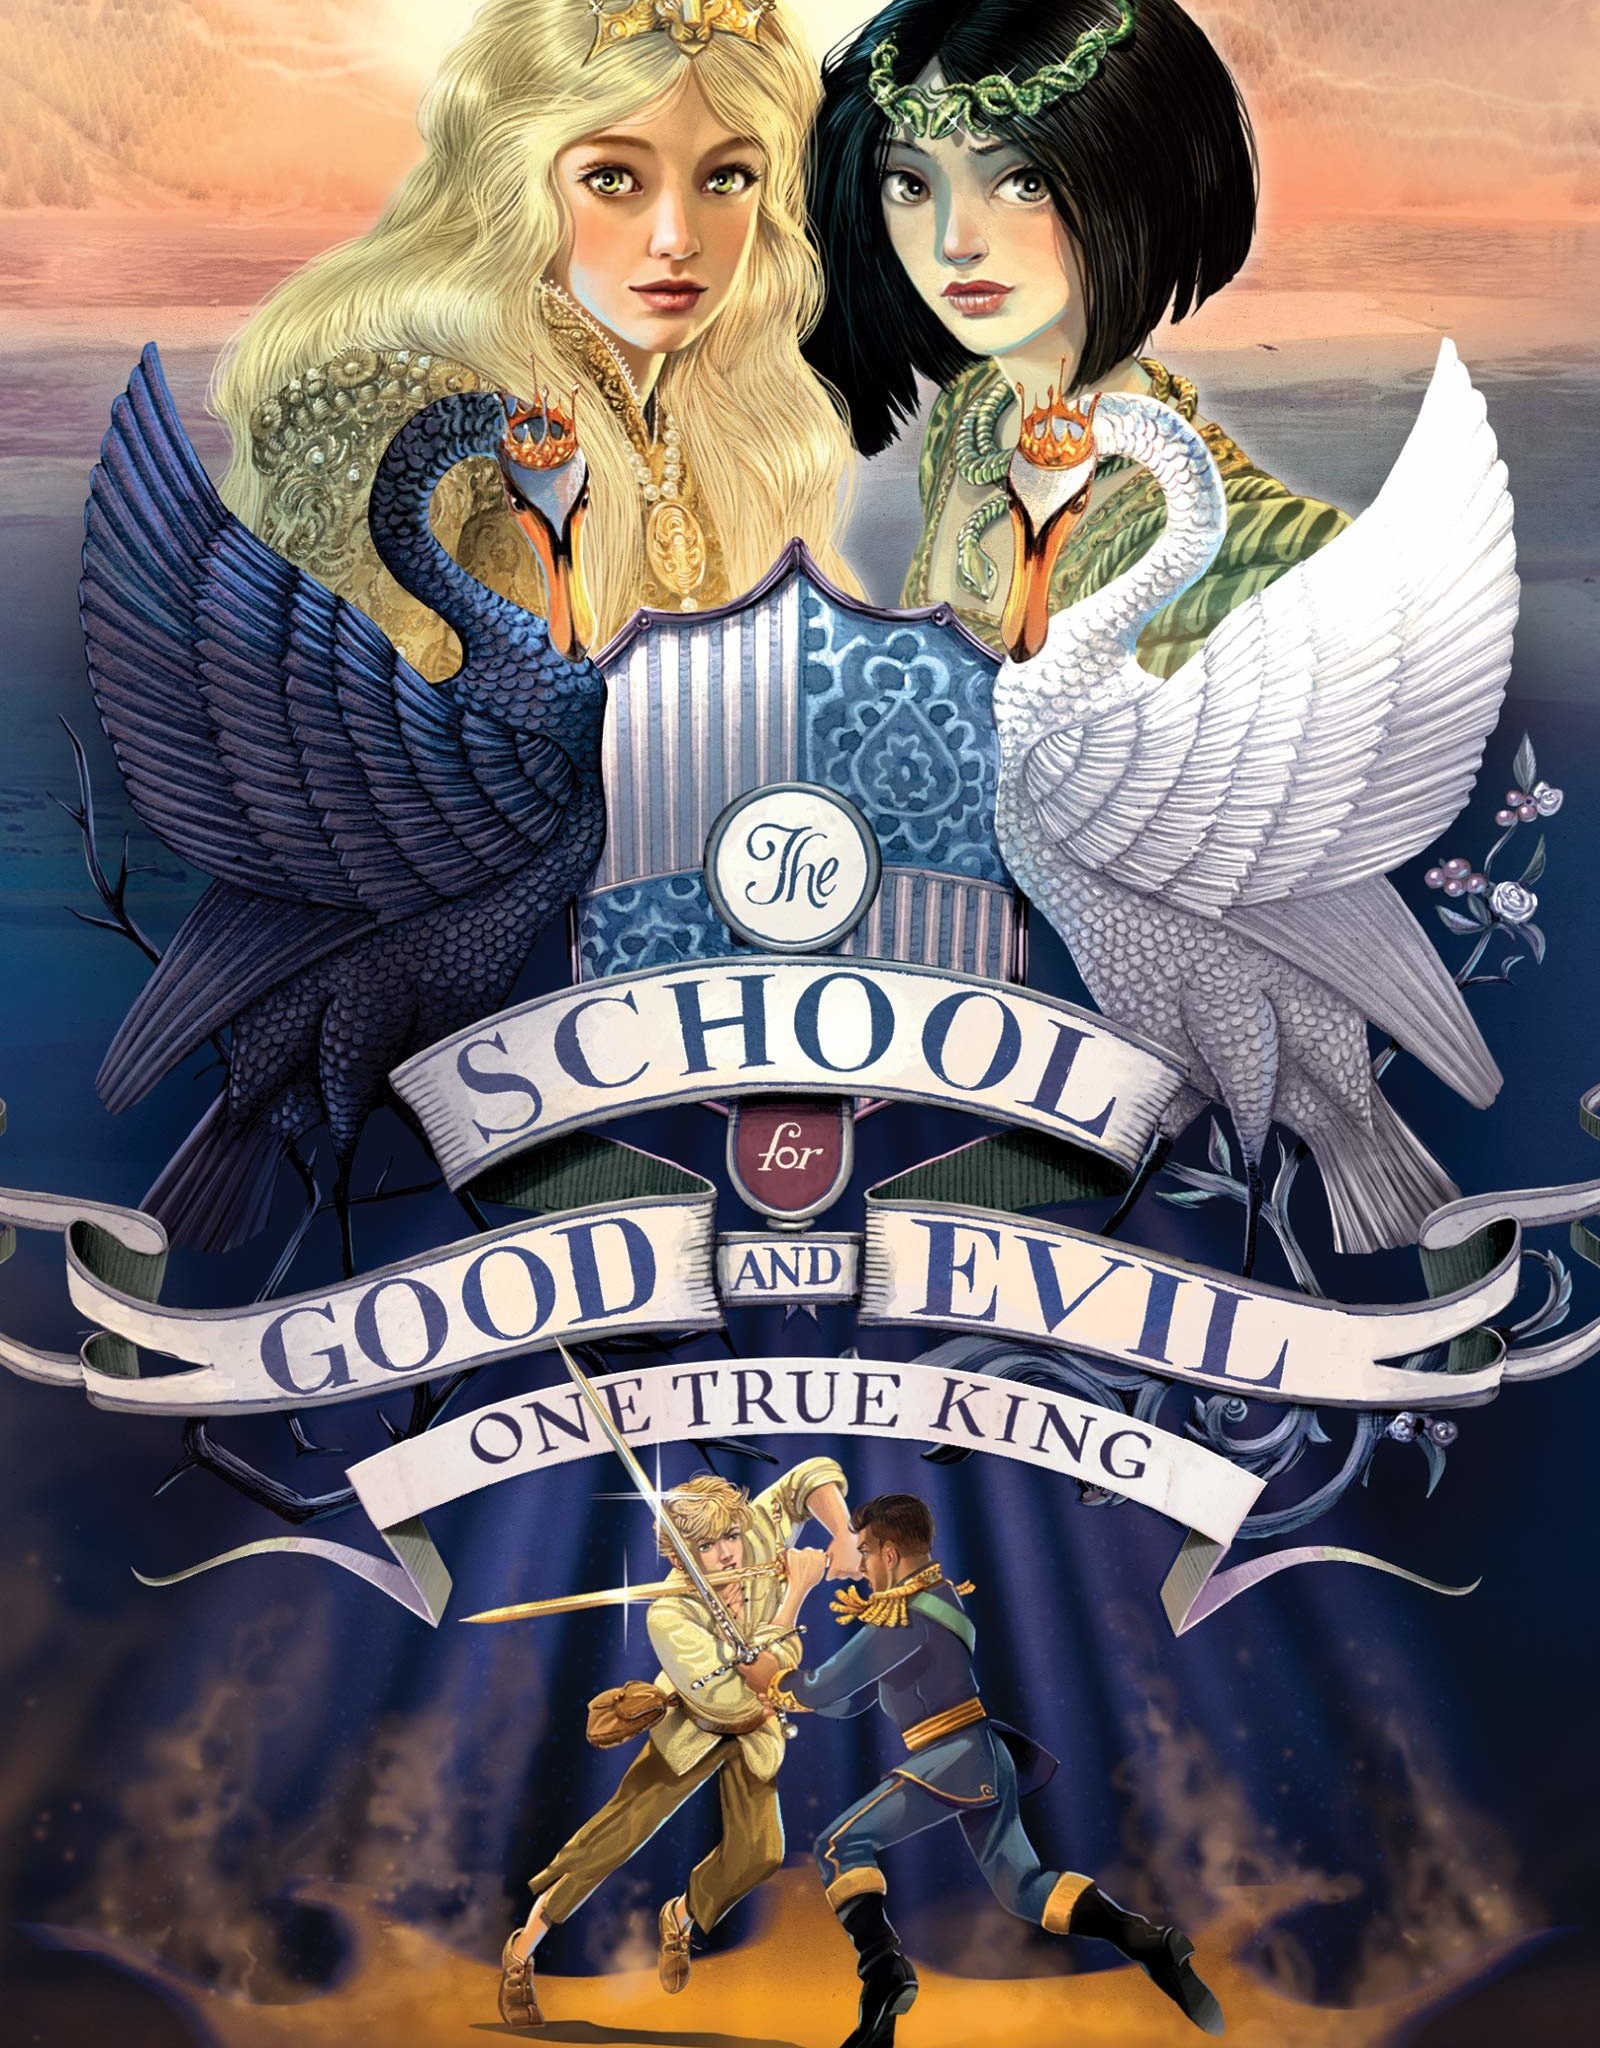 The School For Good And Evil 06 One True King Hc Tree House Books